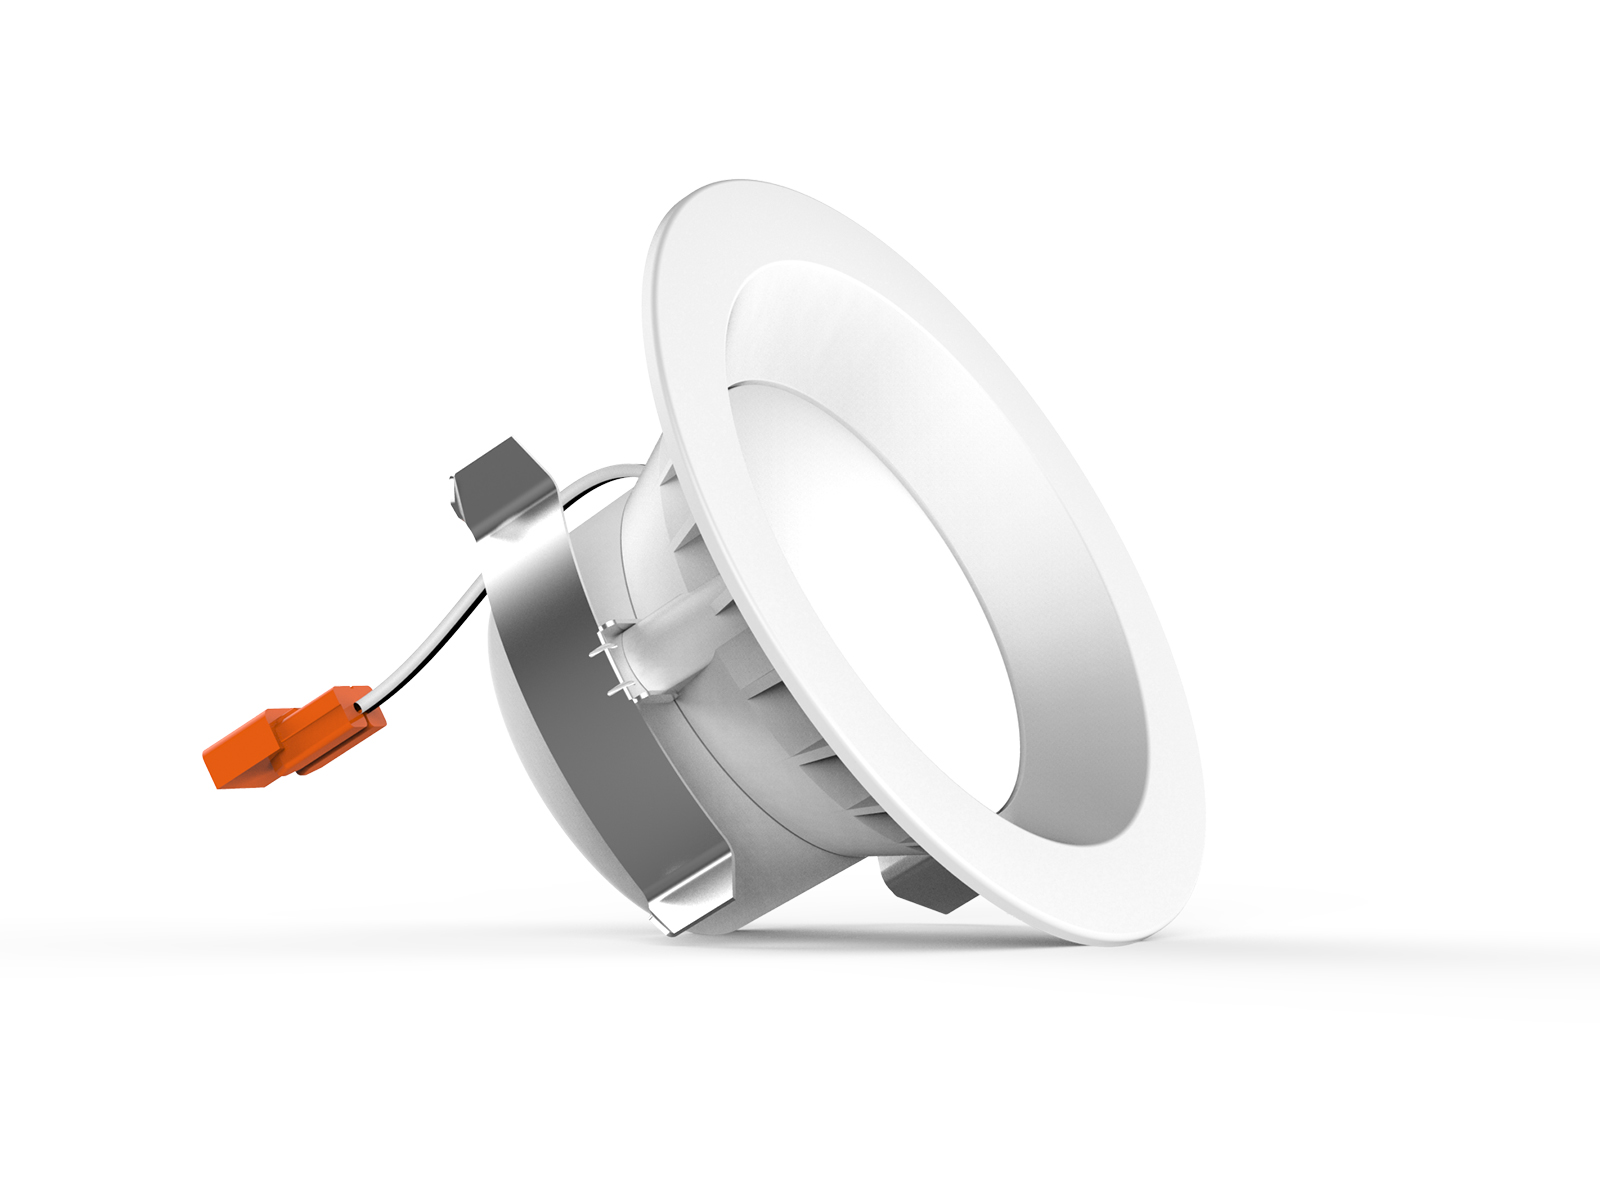 4 Inch Downlight Retrofit Kit With E26 Adapter